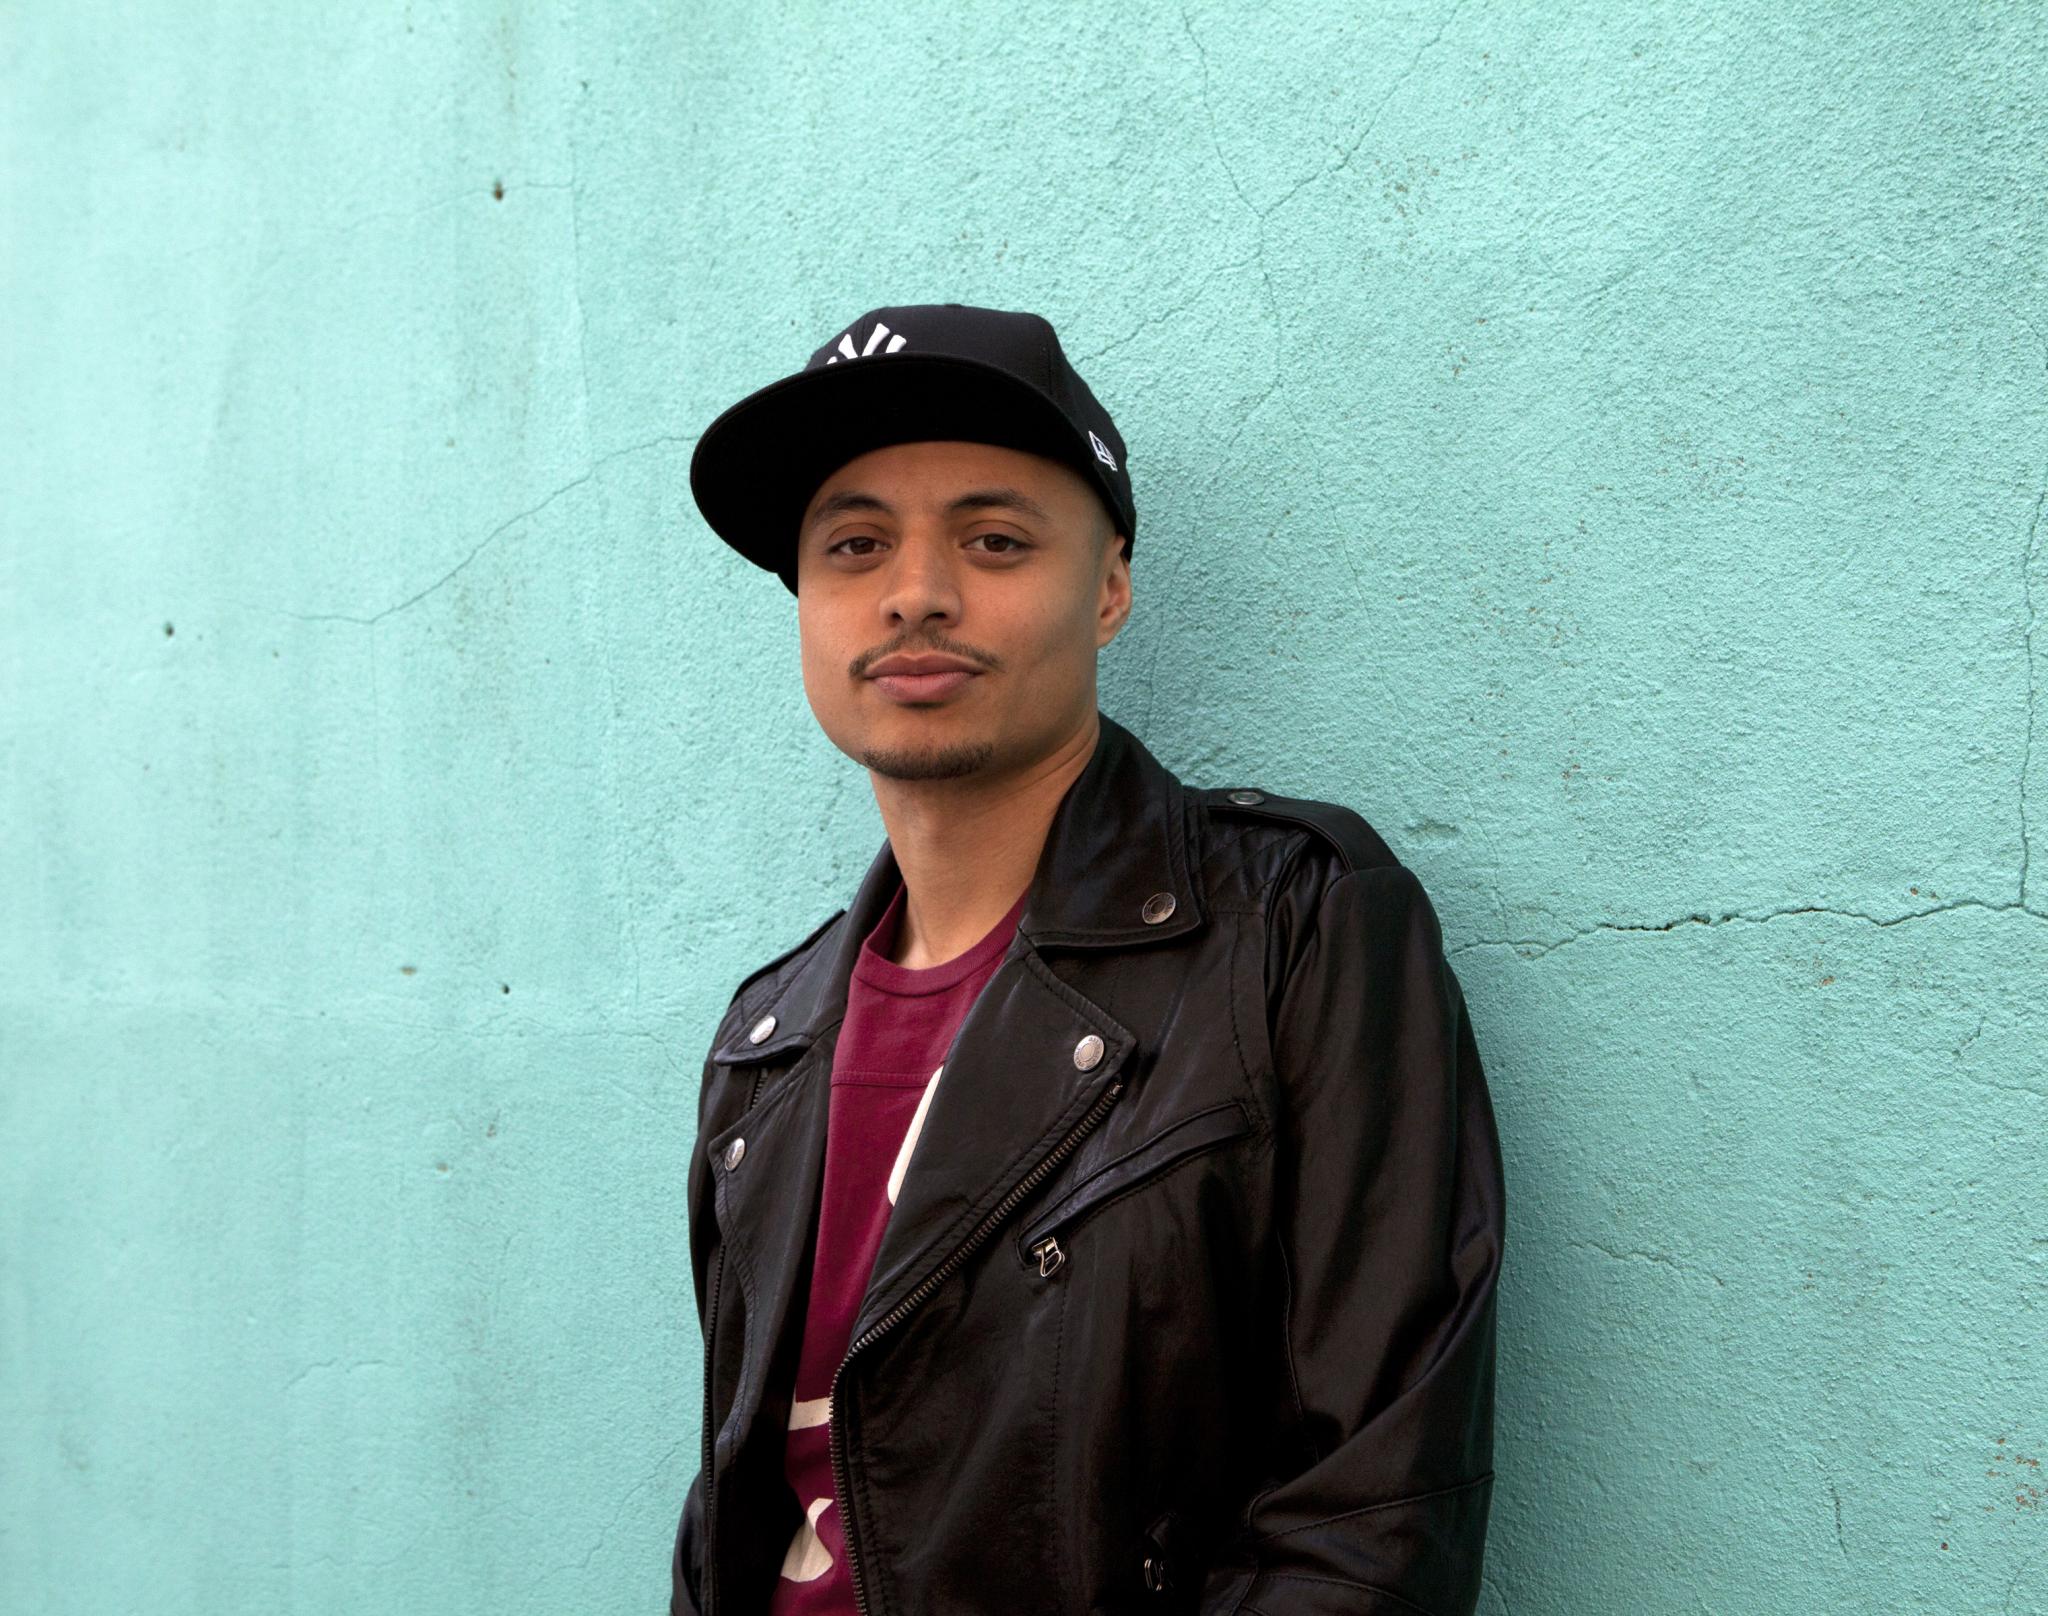 New & Next: Jazz Singer Jose James on Finding His Own Musical Path